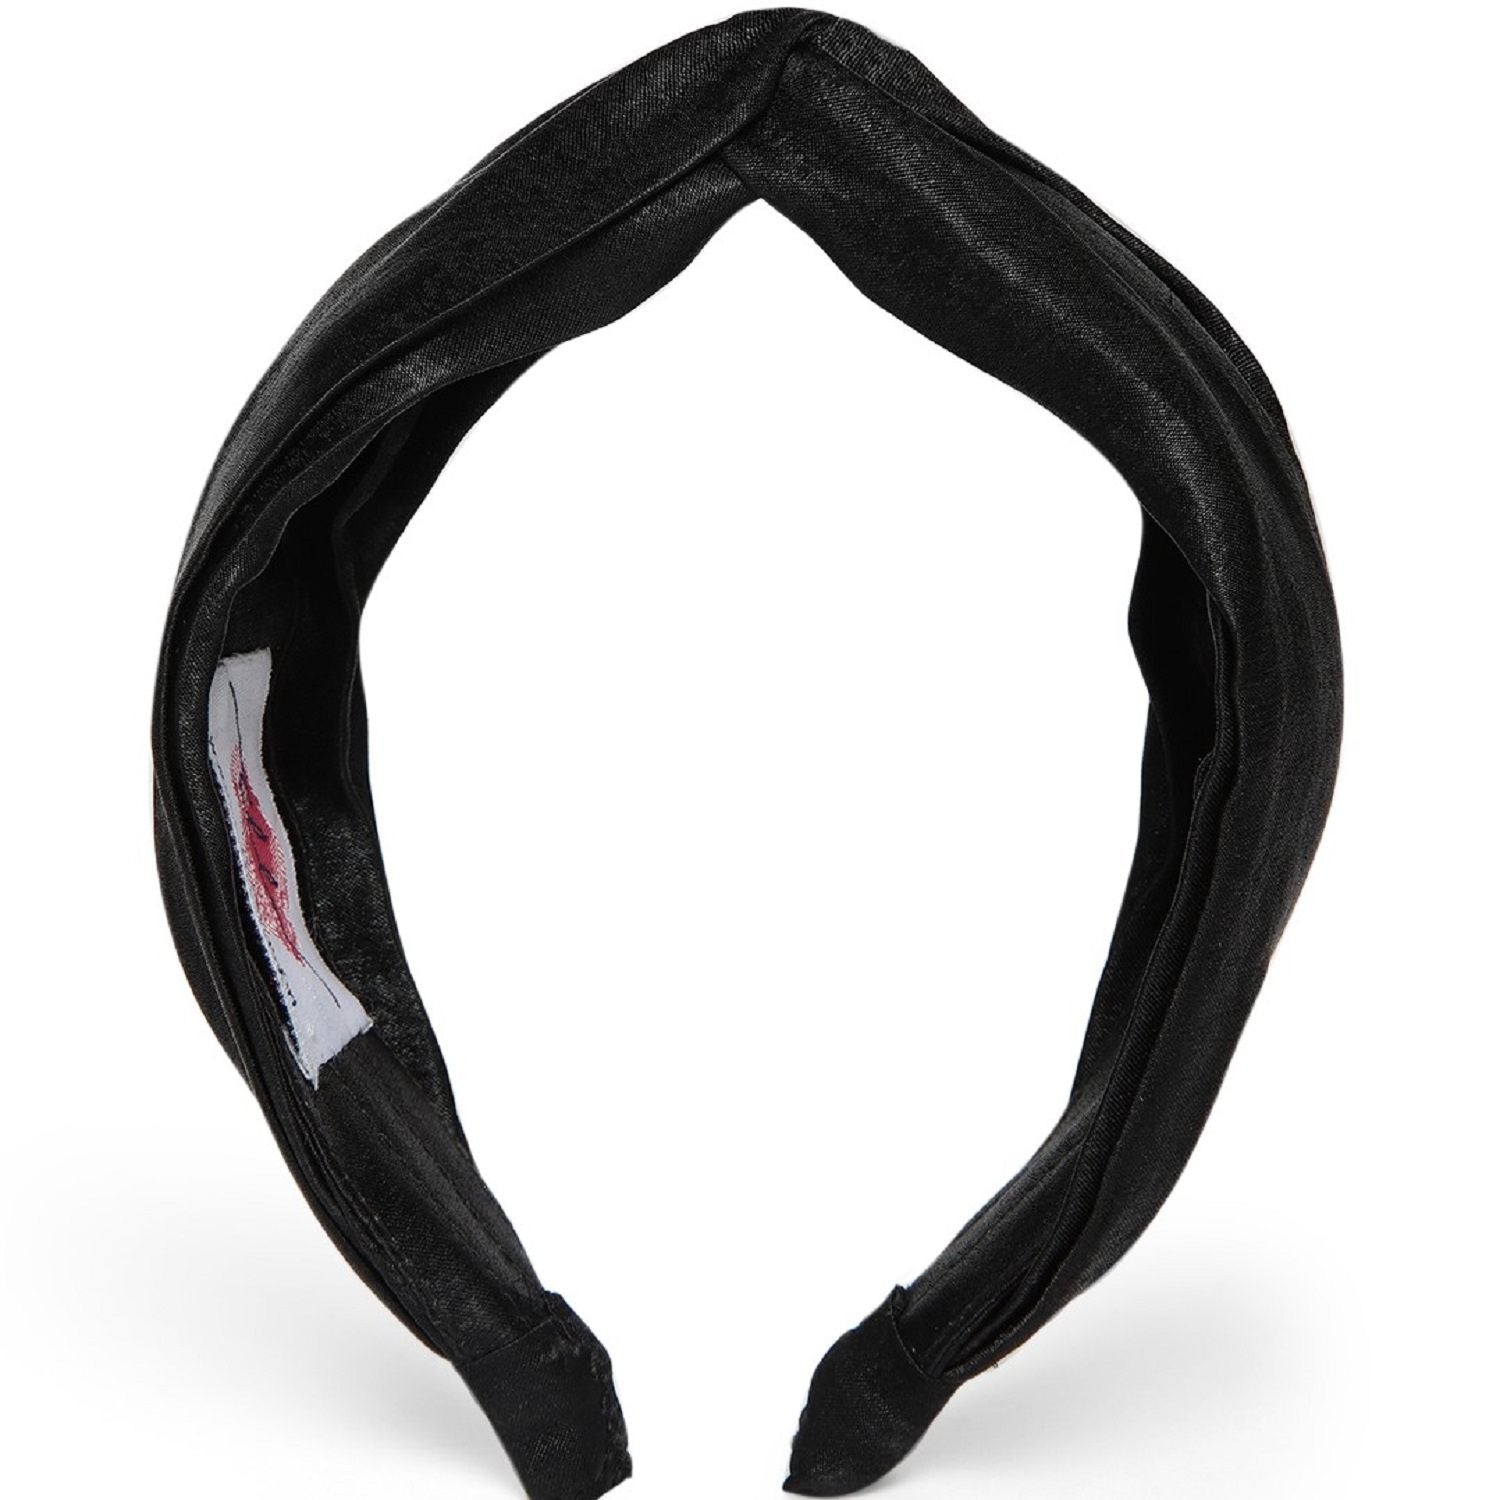 Veronica Headband in Black Satin with Large Scrunchie